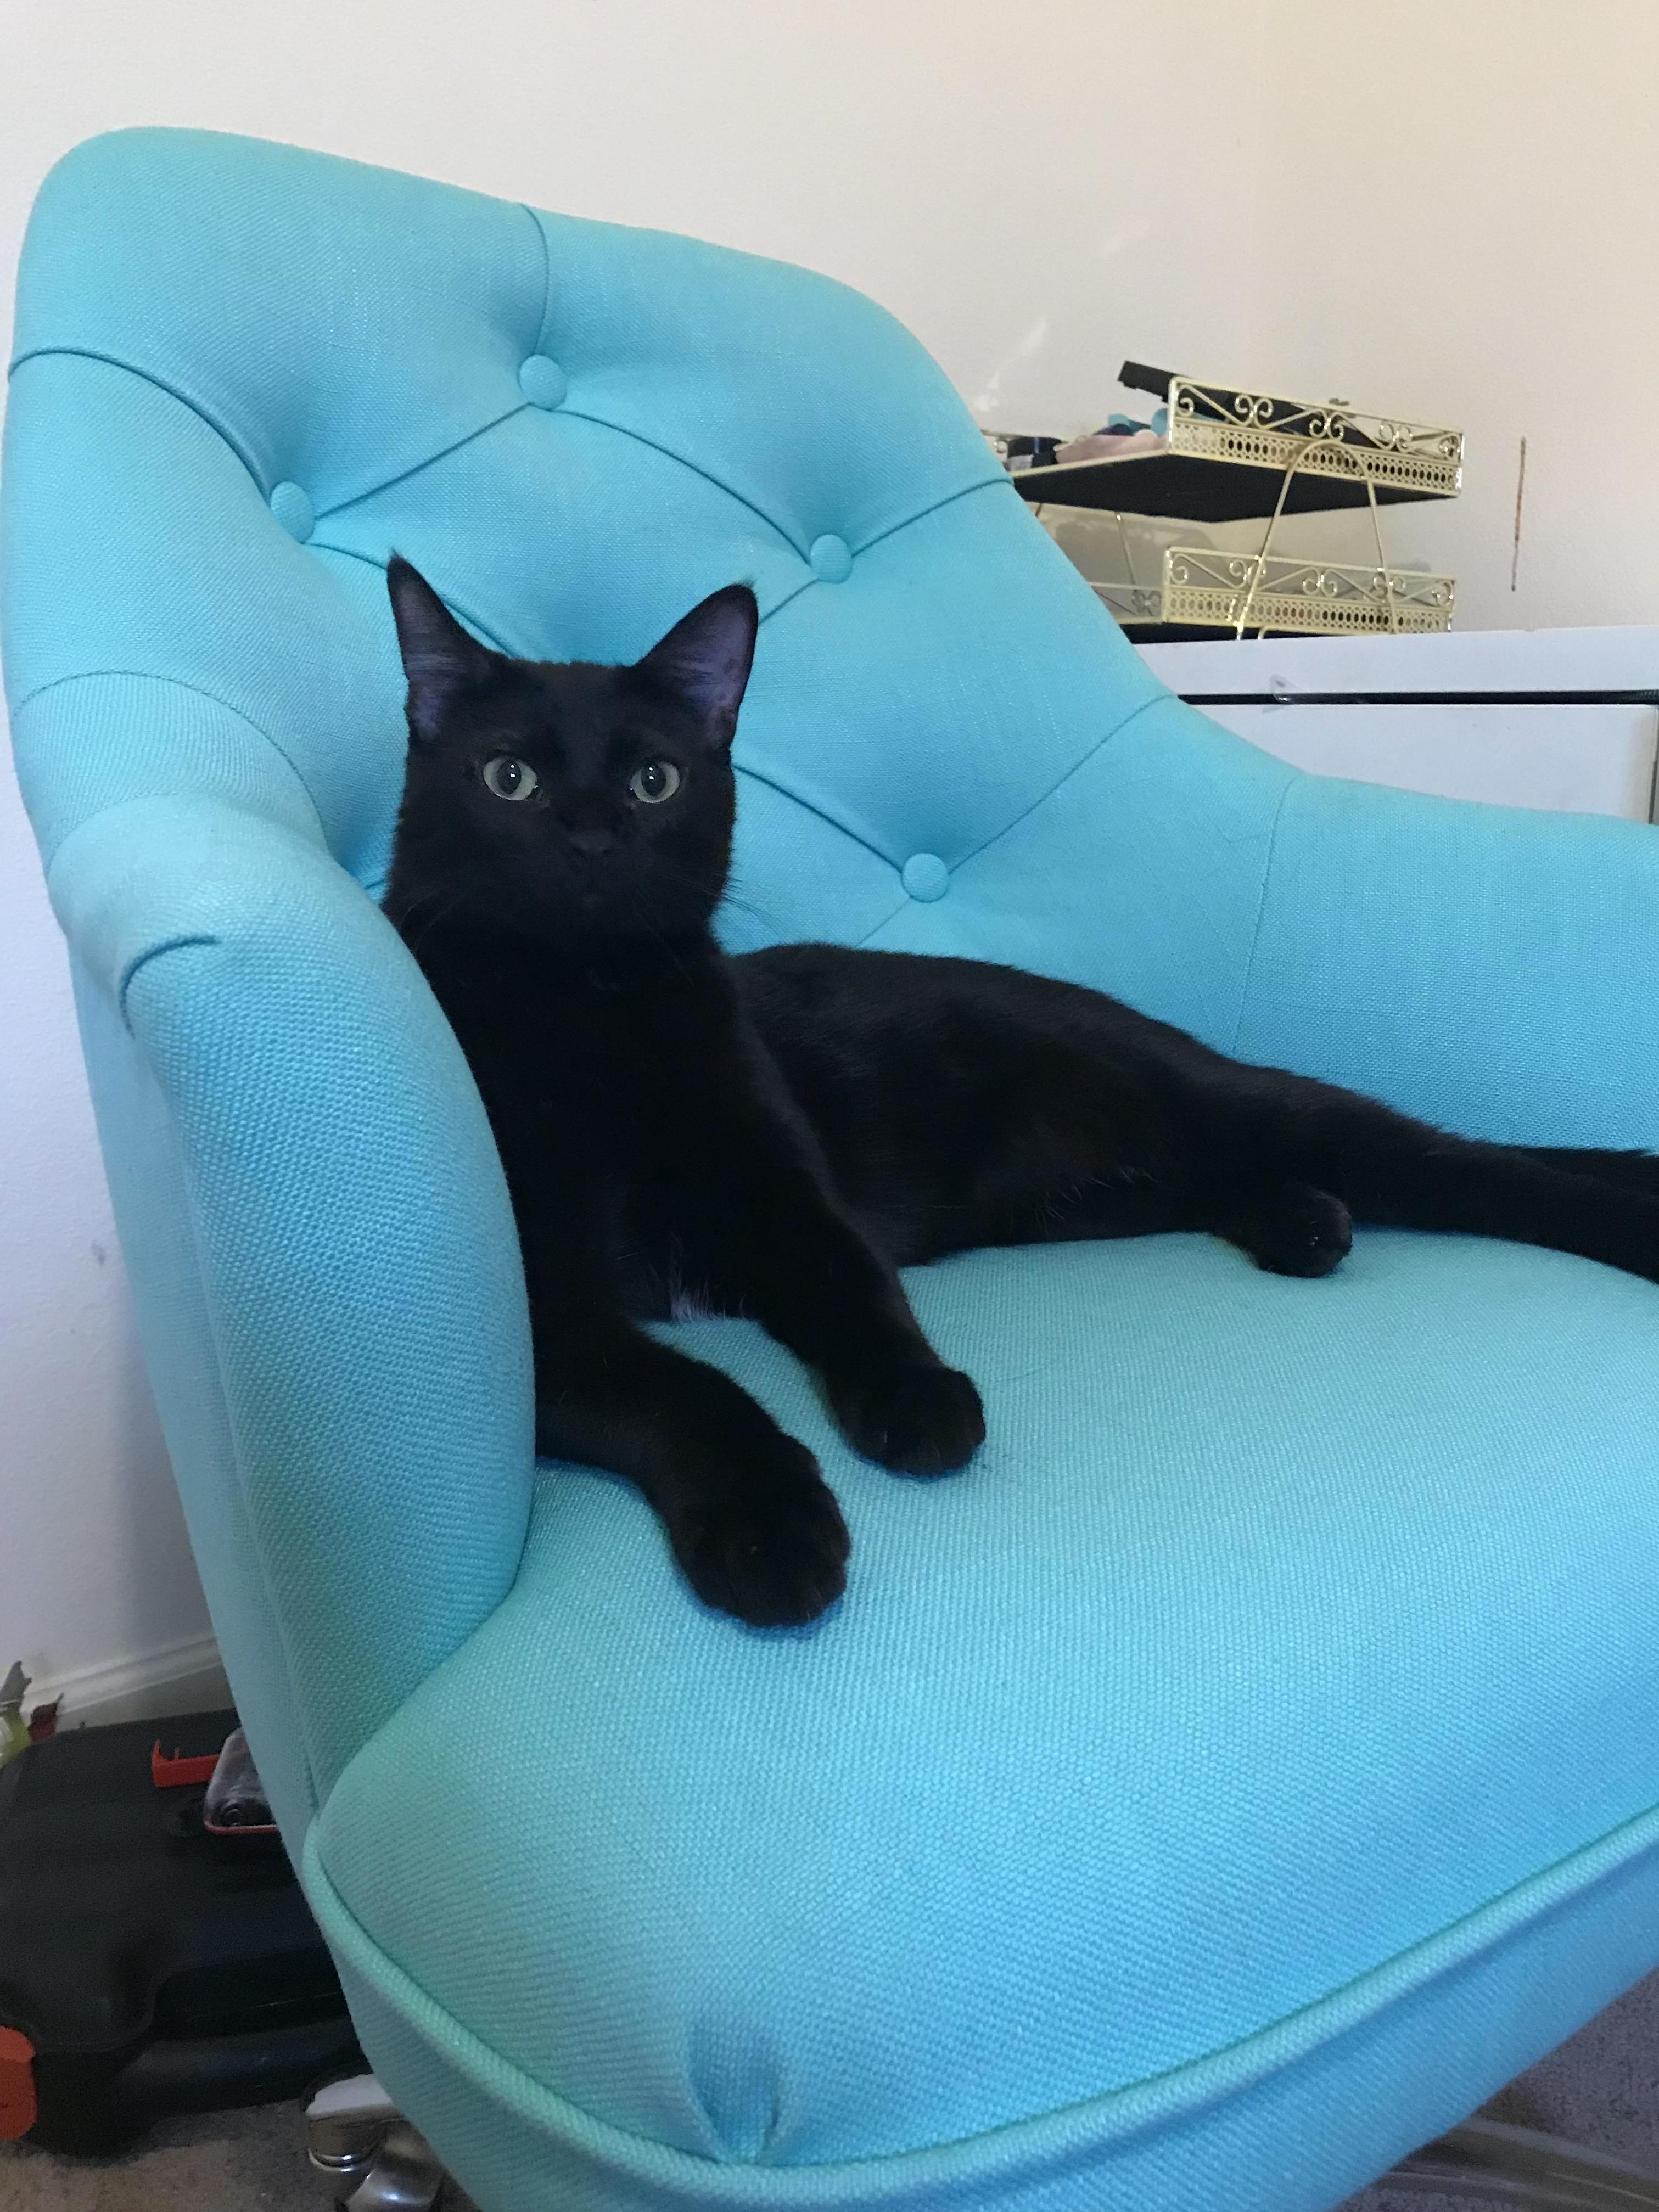 Had to be first in moms new chair. mufasa is king of all he surveys.